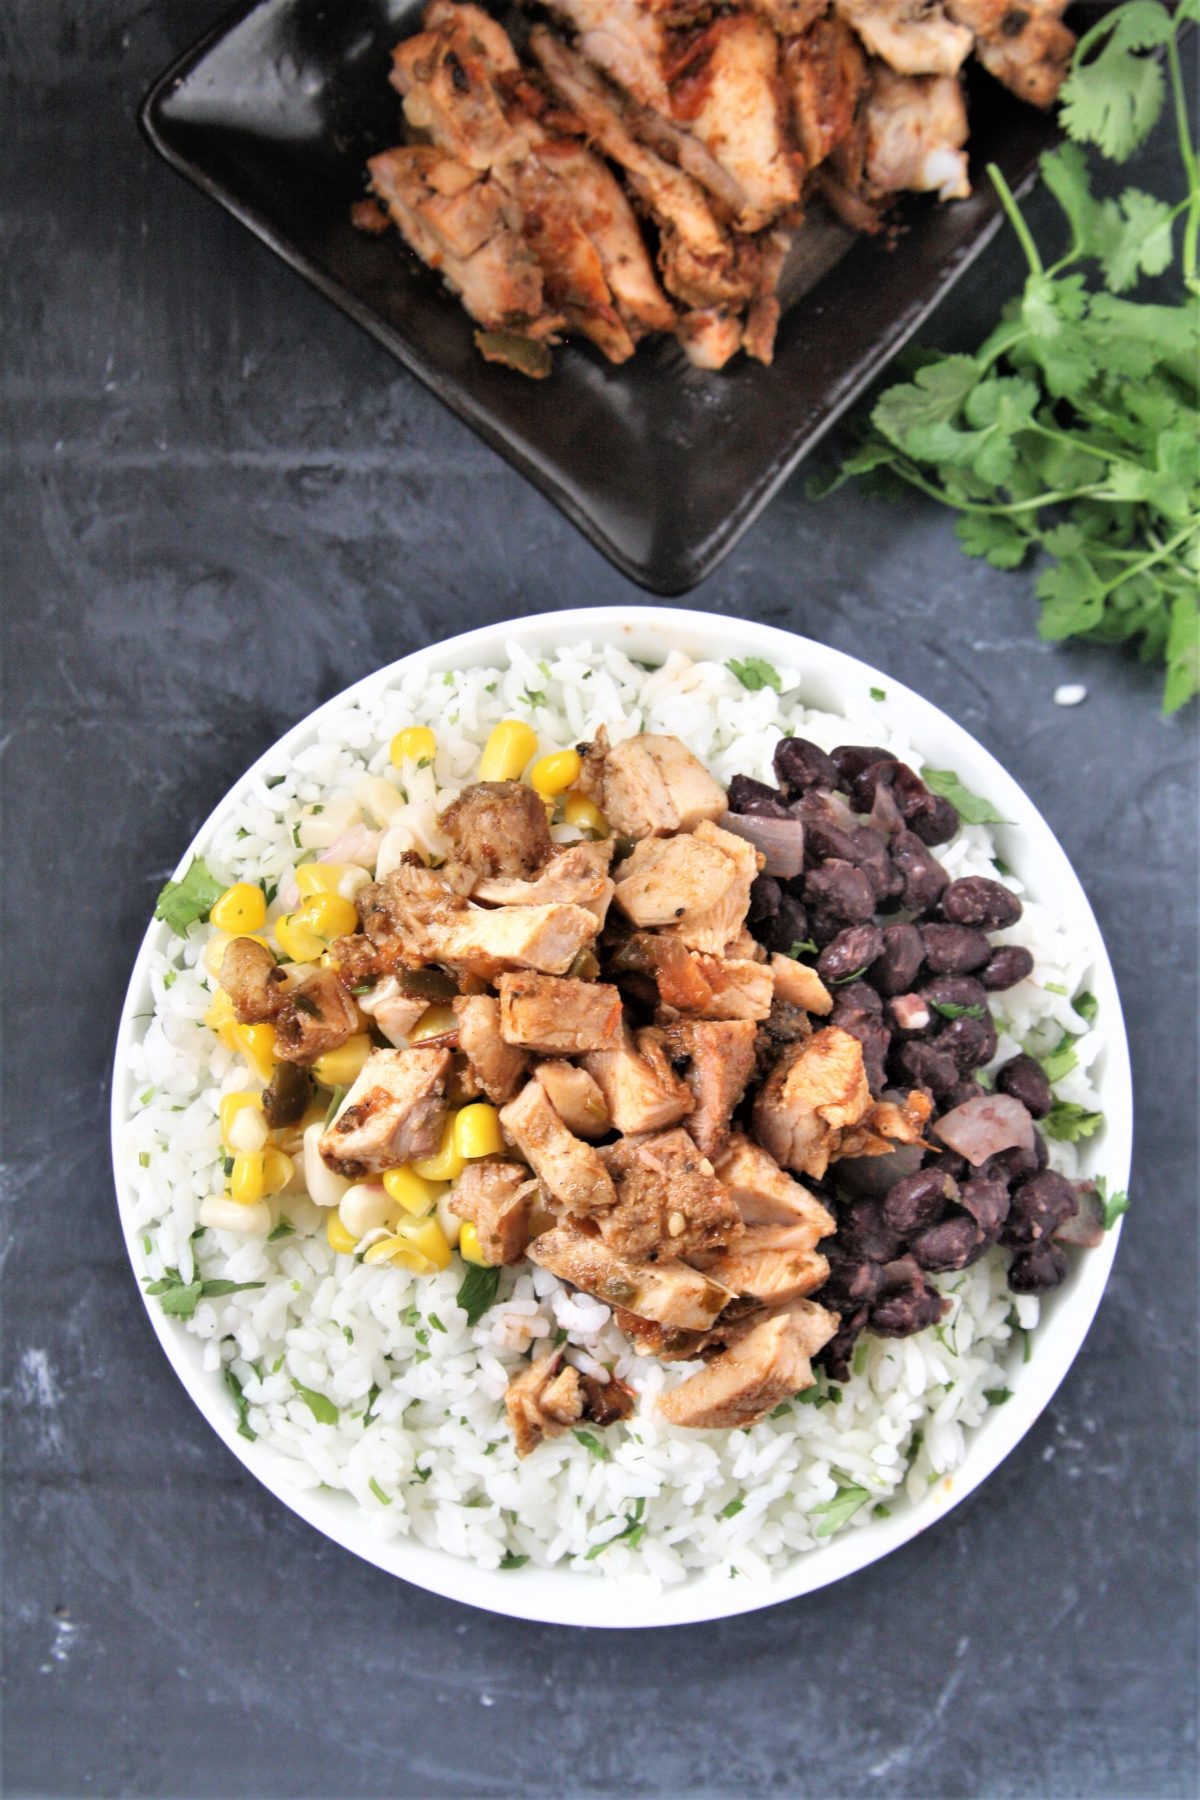 This easy Chipotle Copycat Pollo Asado is flavorful, tender, juicy, and tastes just as good as than the original. Perfect in tacos, burritos, salad bowls, and more!